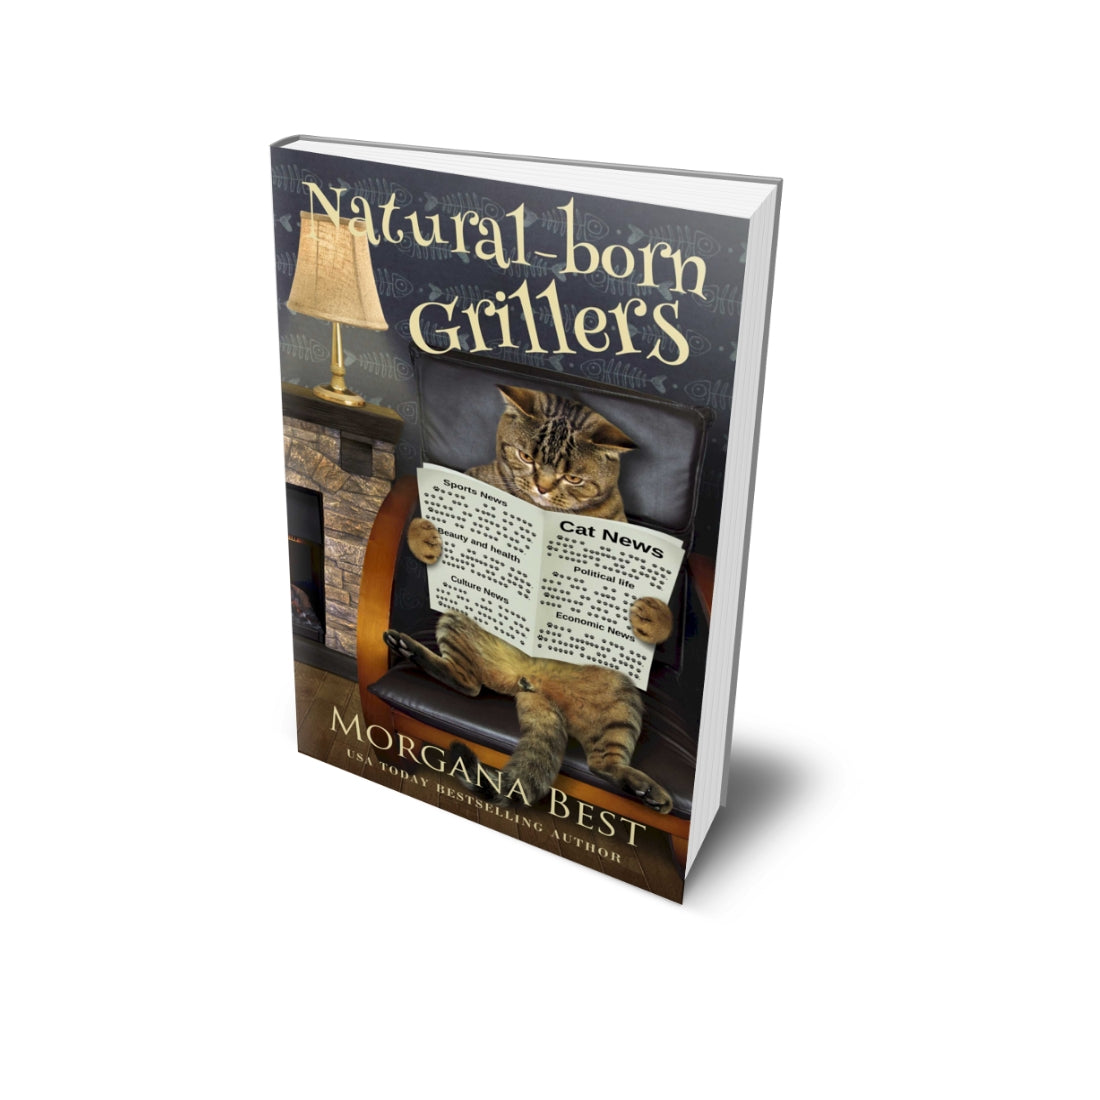 Natural-born Grillers PAPERBACK cozy mystery